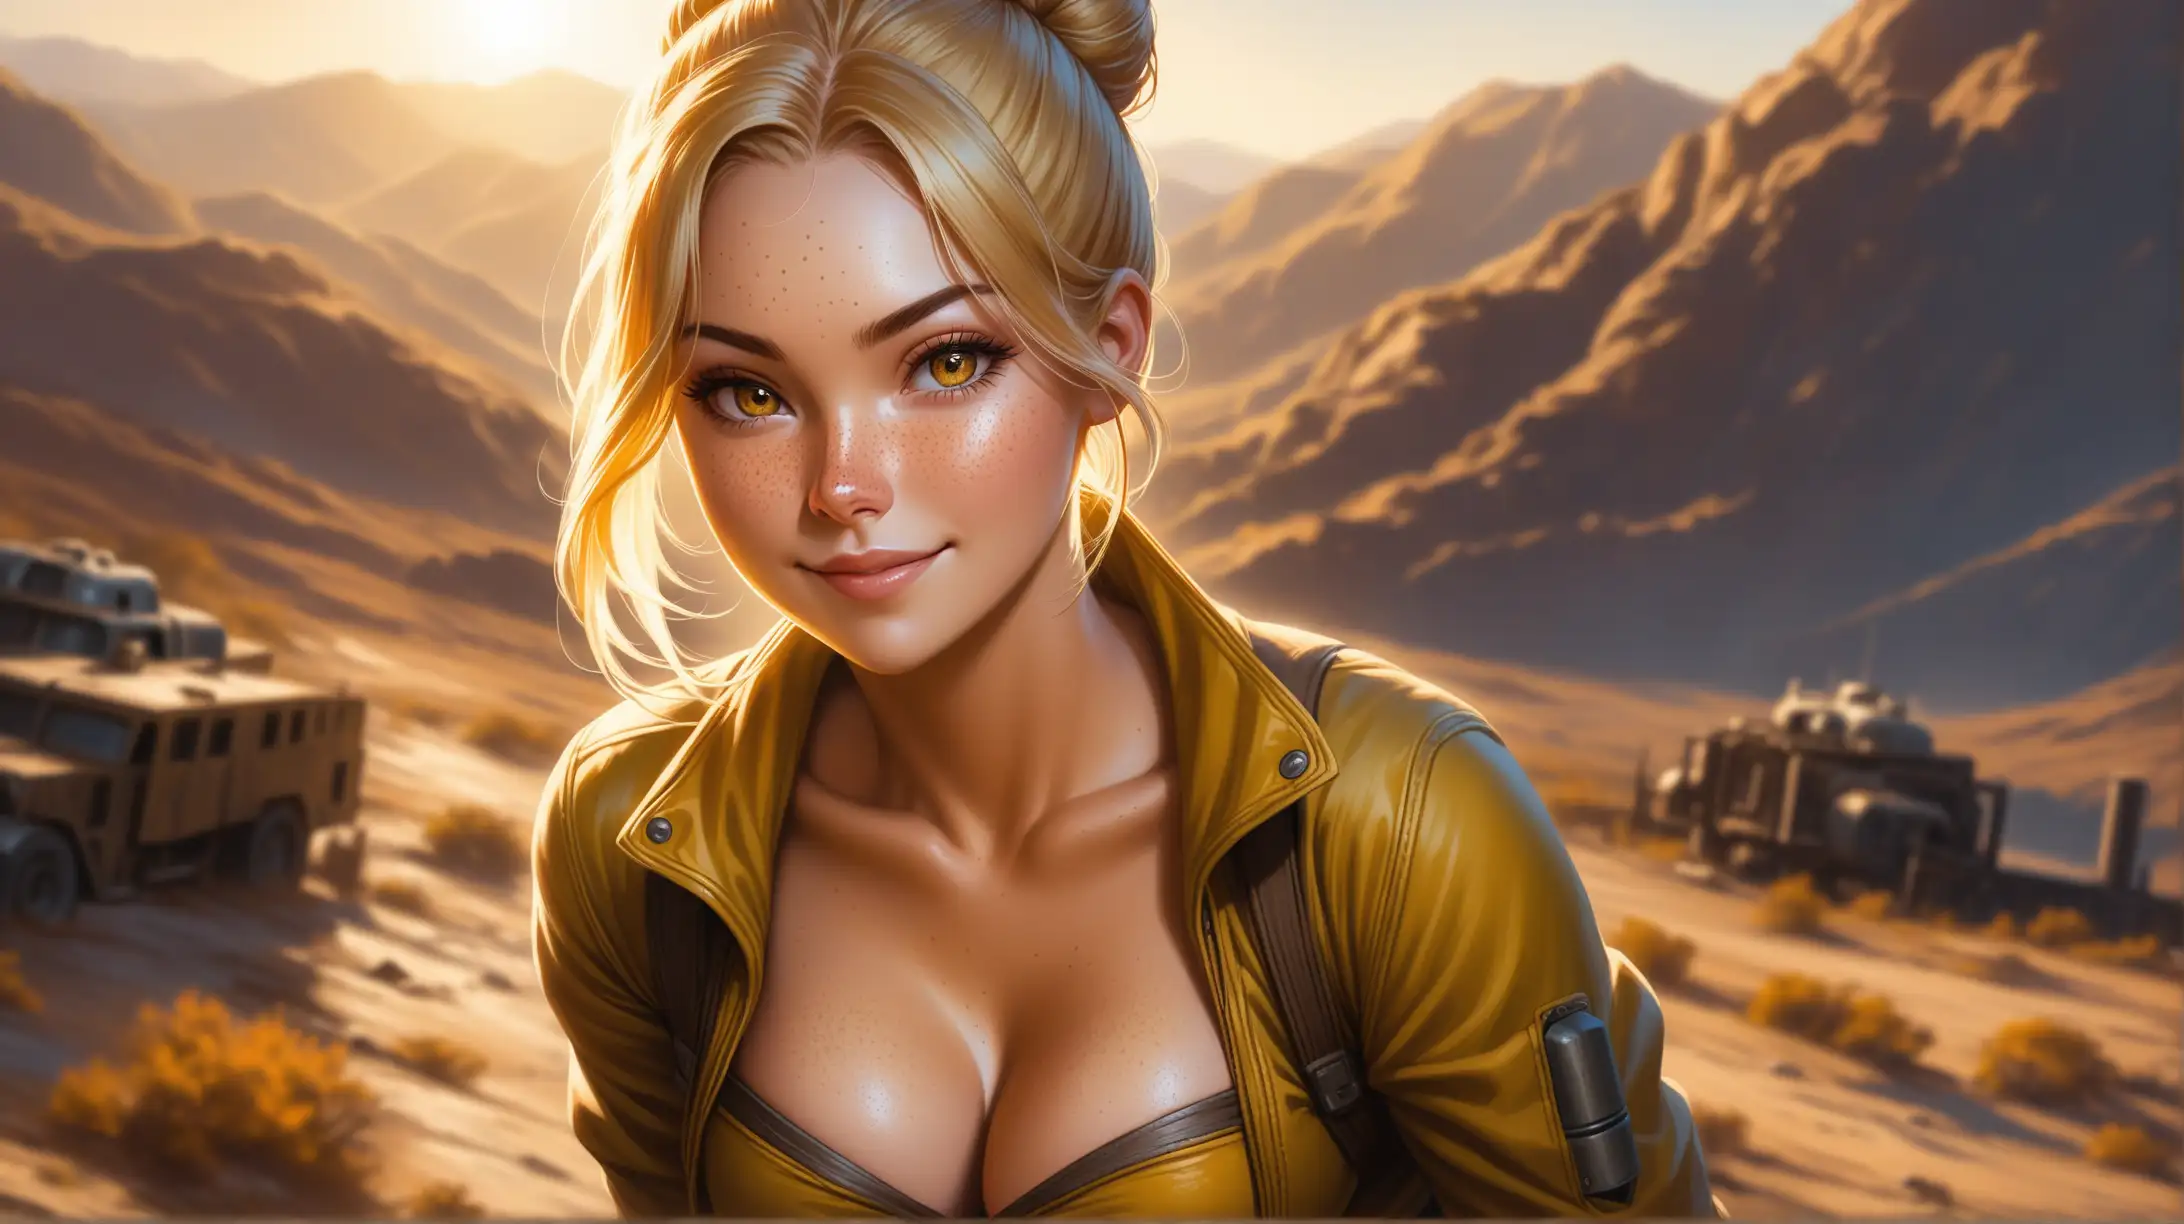 Seductive FalloutInspired Blonde Woman Smiling Outdoors